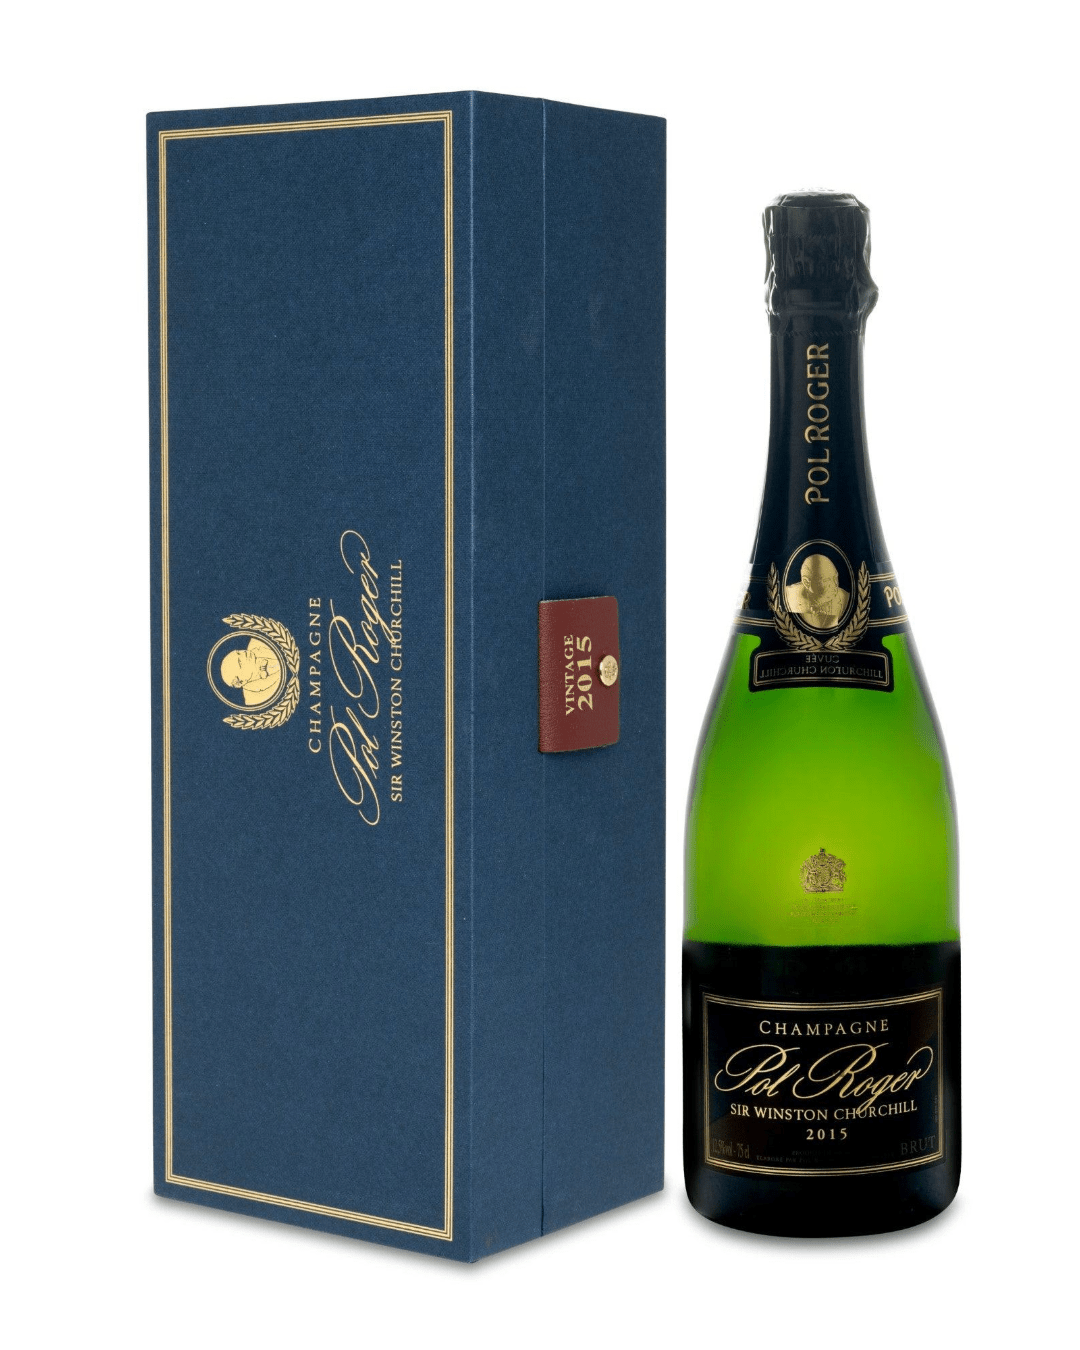 Pol Roger Cuvee Sir Winston Churchill 2015 Champagne Gift Box, 75 cl Champagne & Sparkling